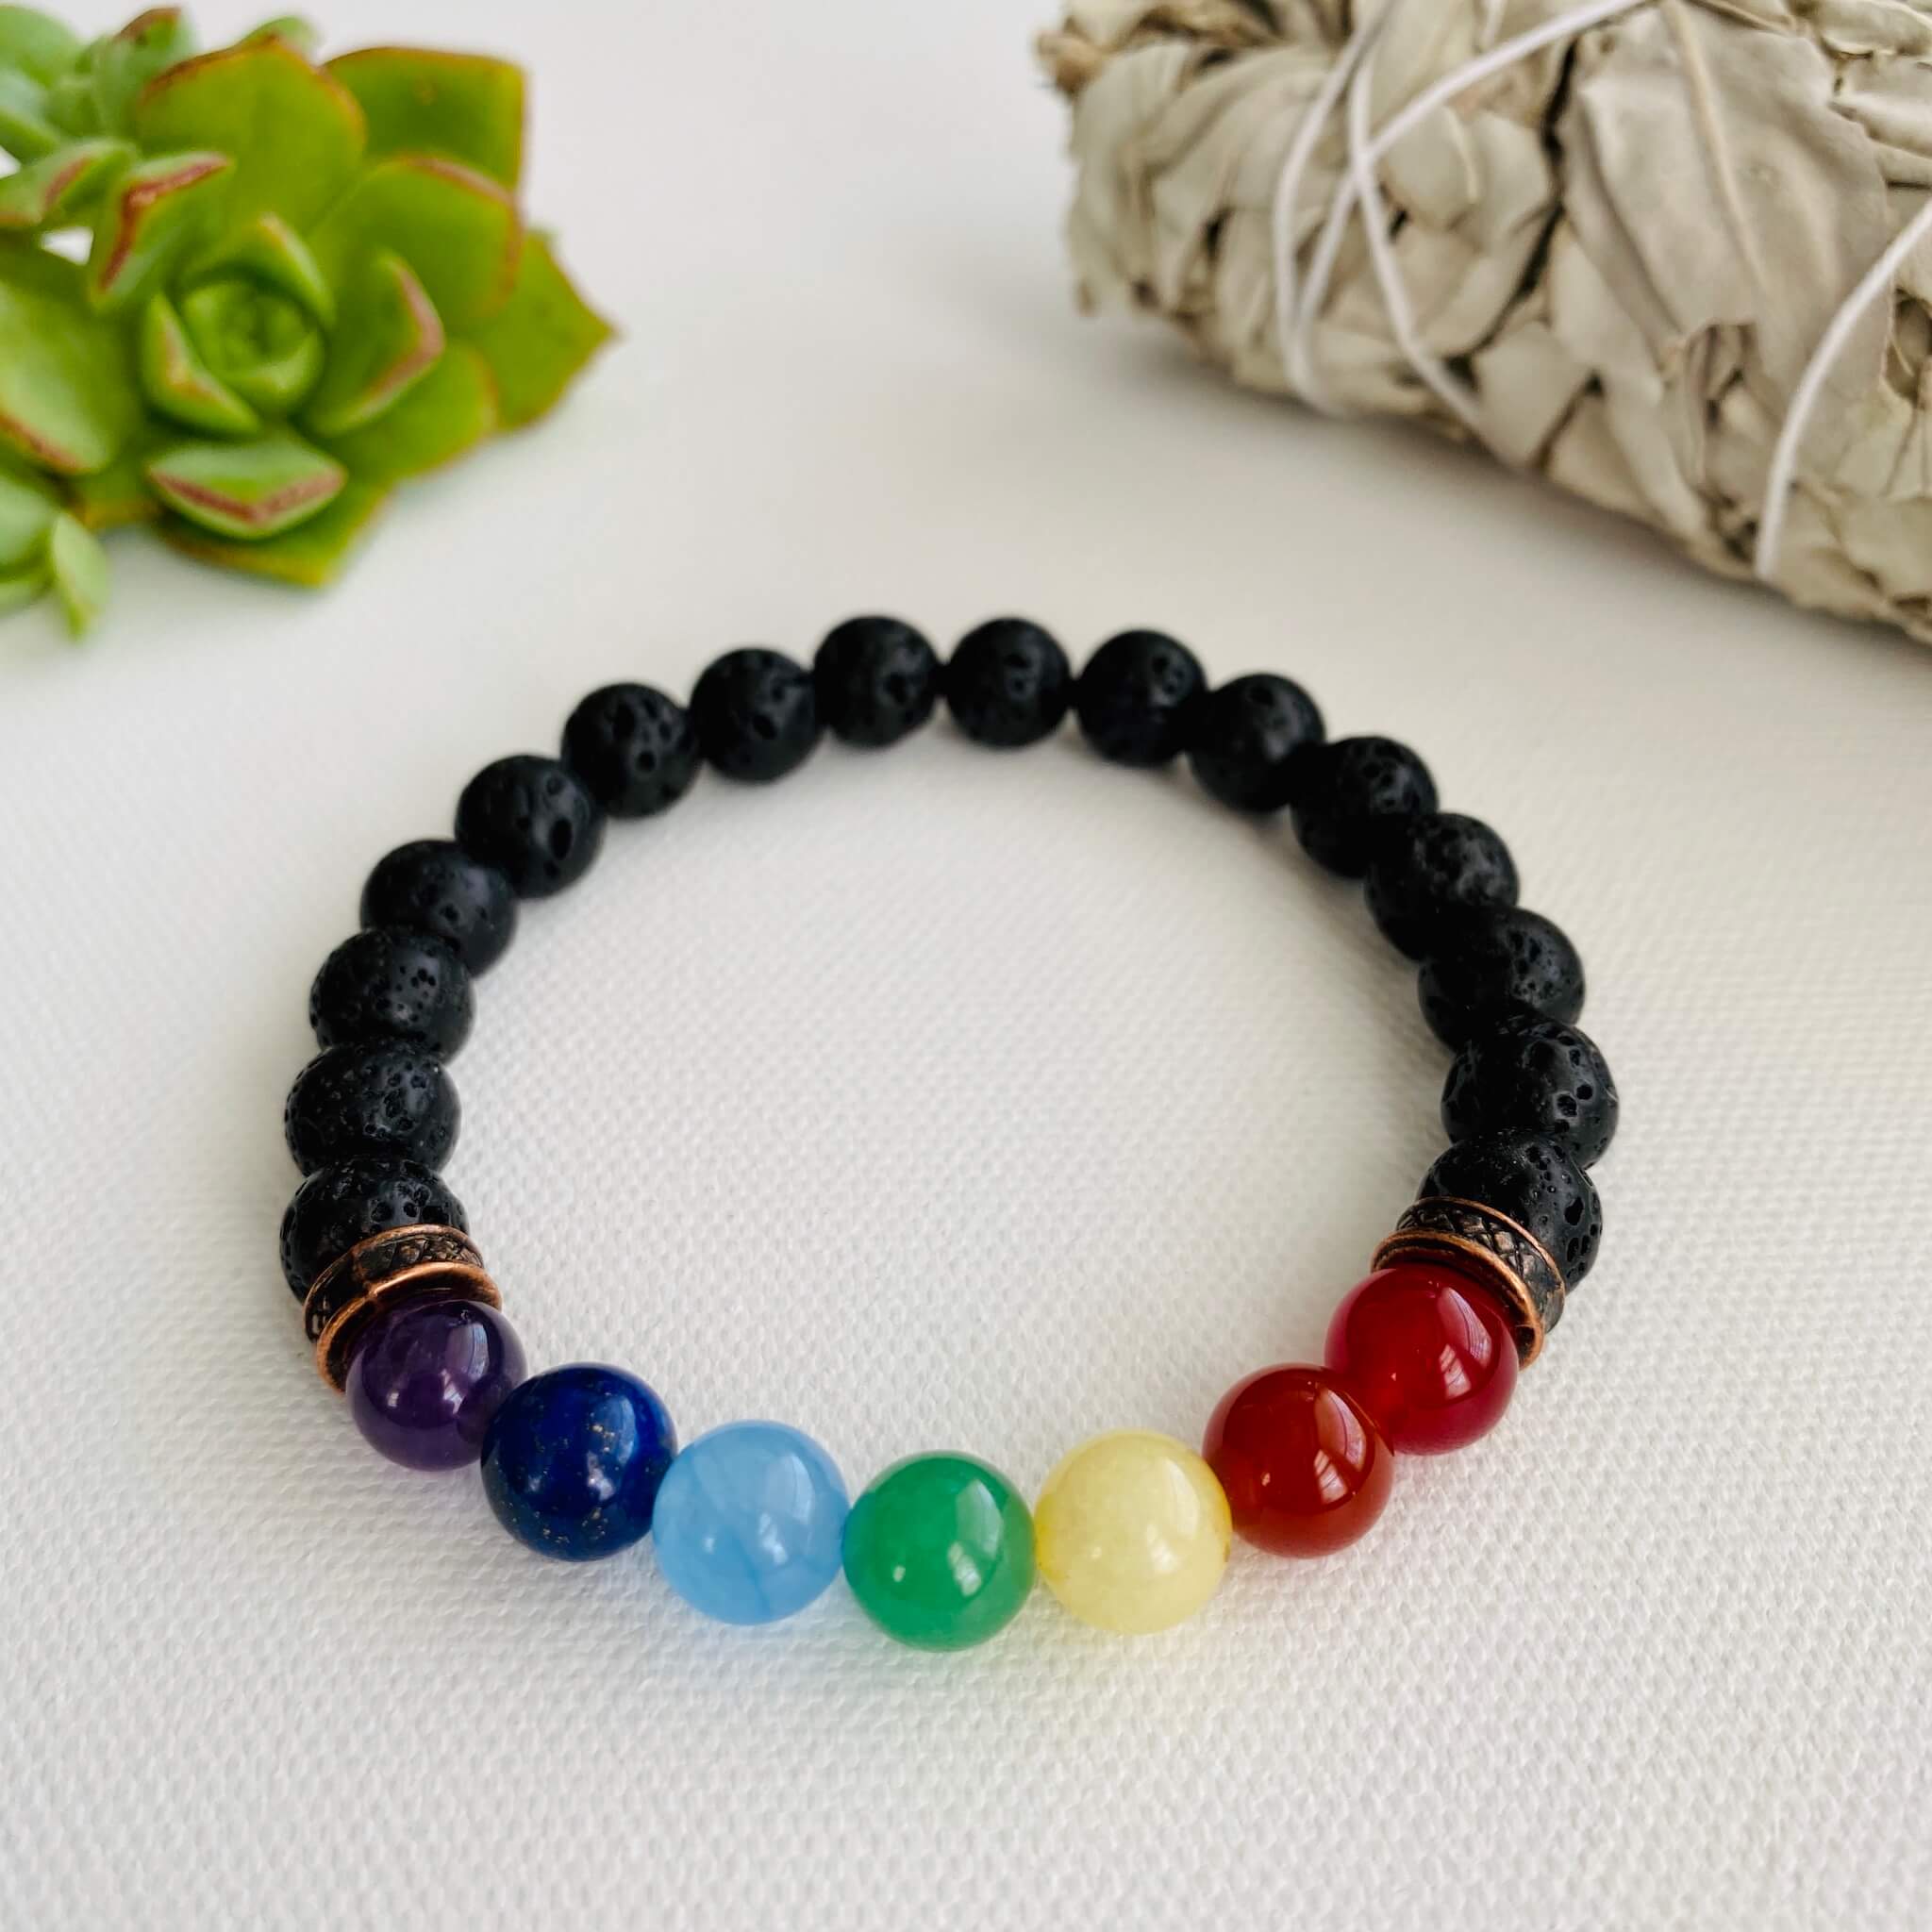 How To Know If Your Chakra Bracelet is Real  Chakra Practice